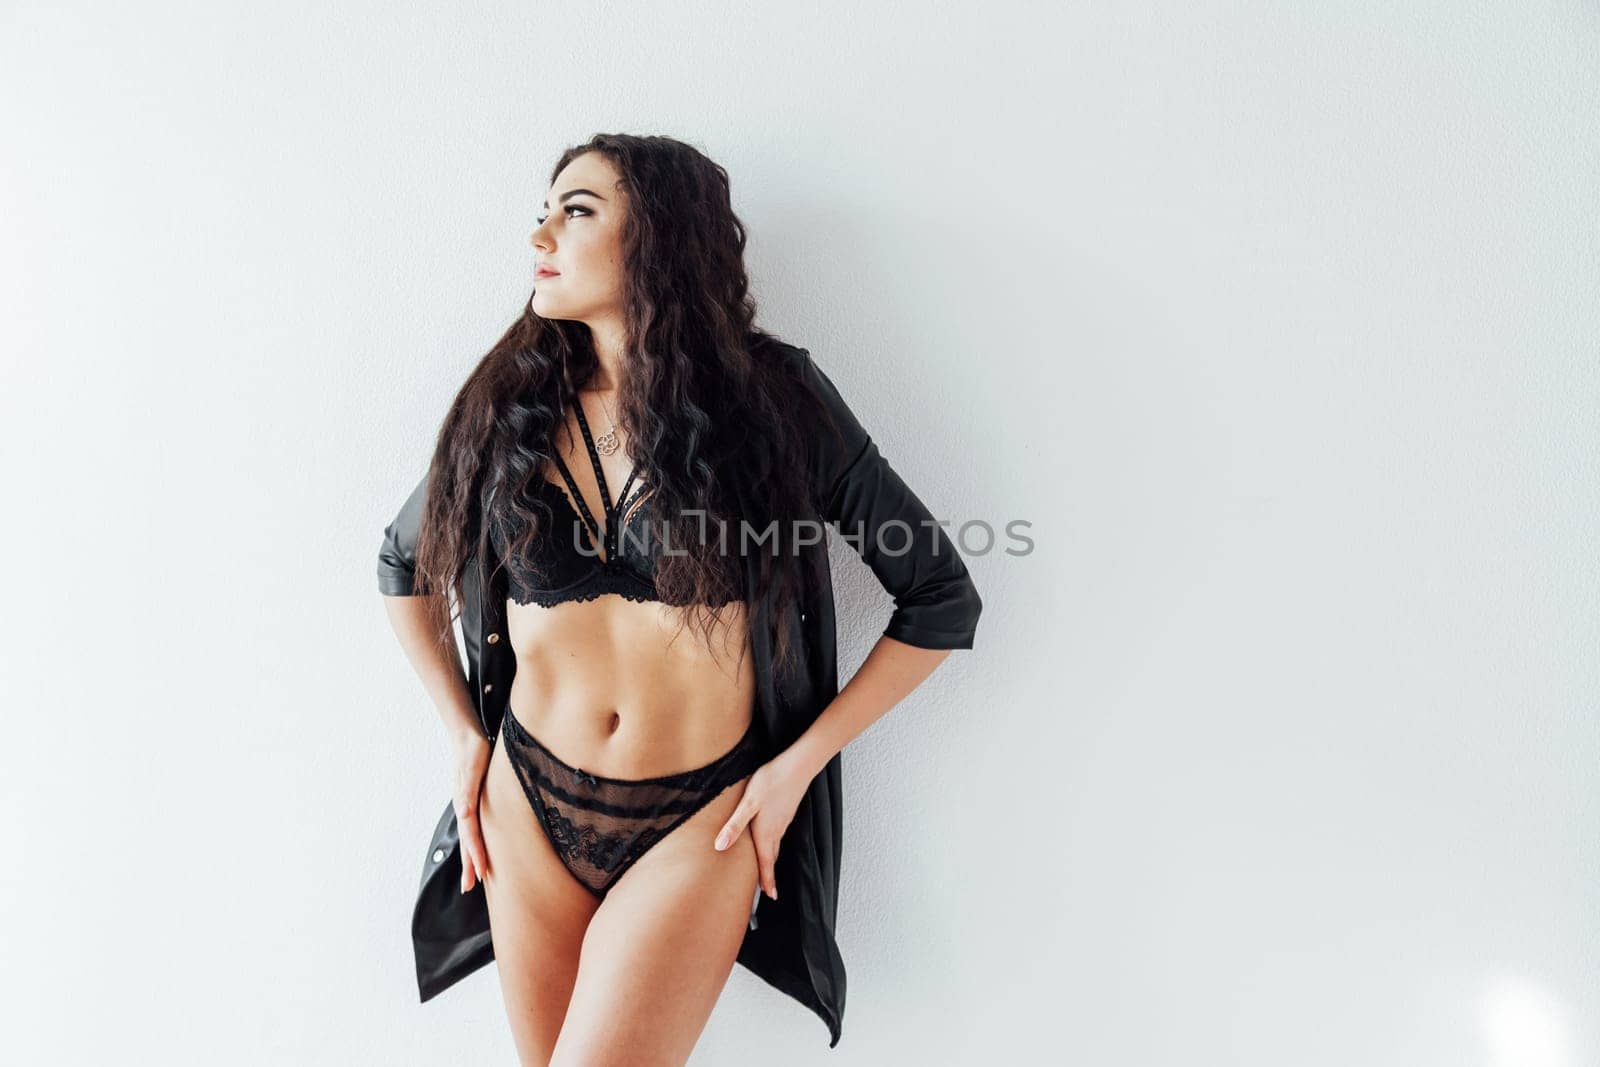 brunette woman in black underwear stands against a white wall